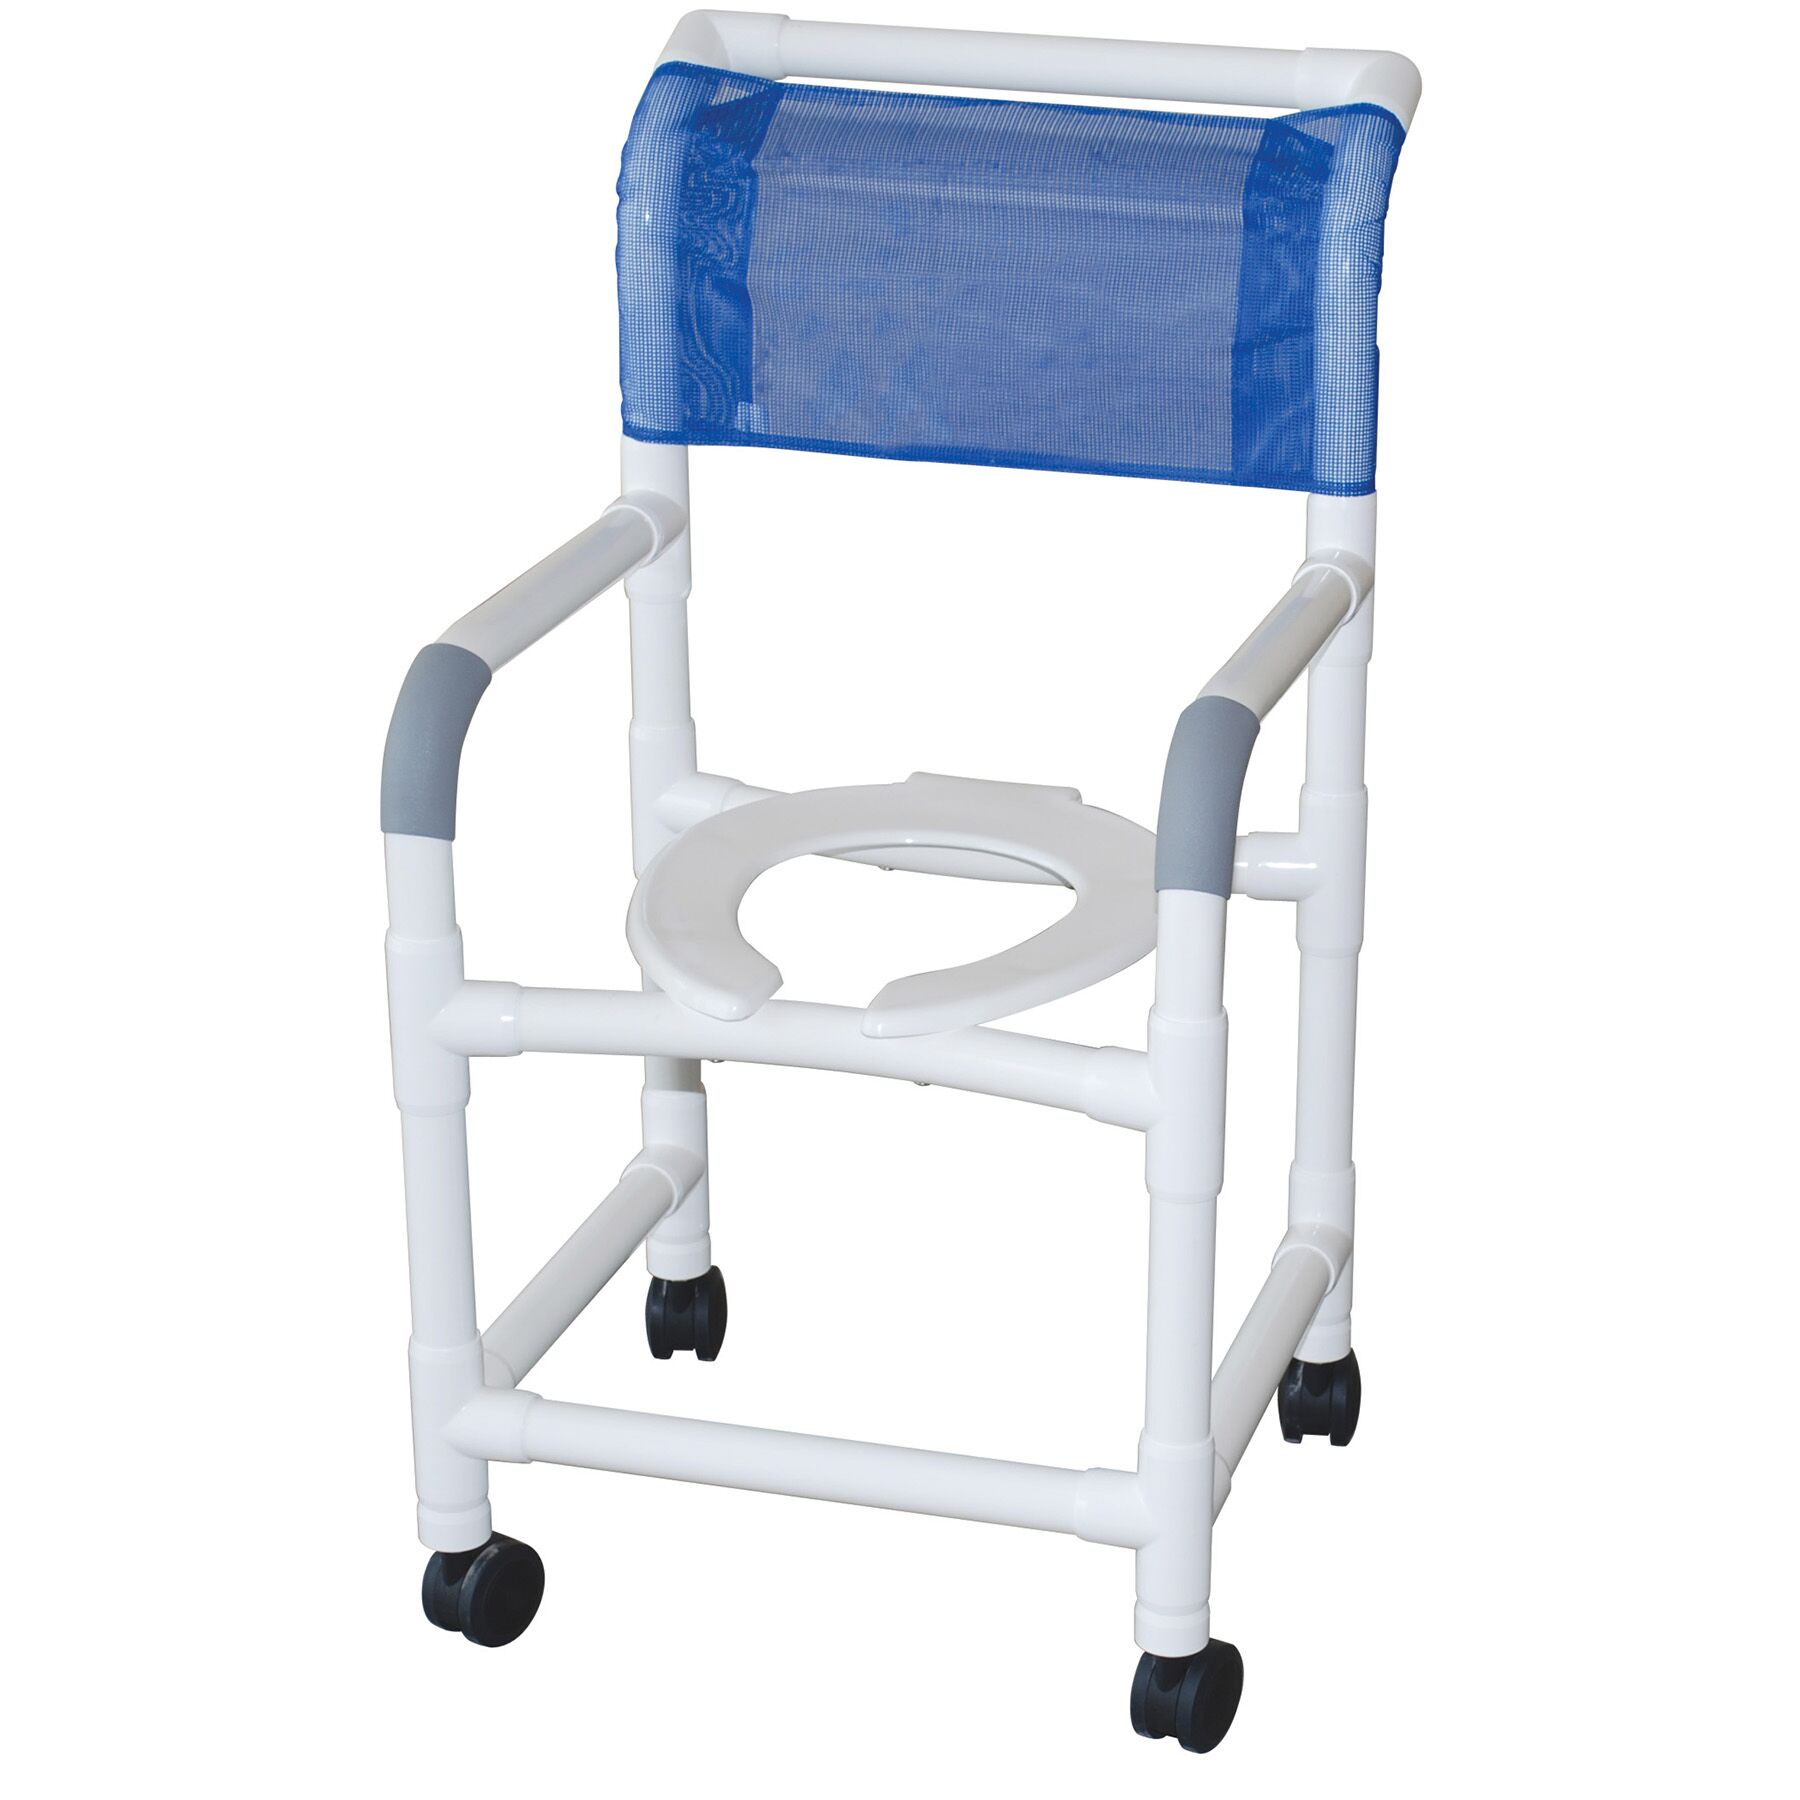 18″ Shower Chair W/ Open Front Seating